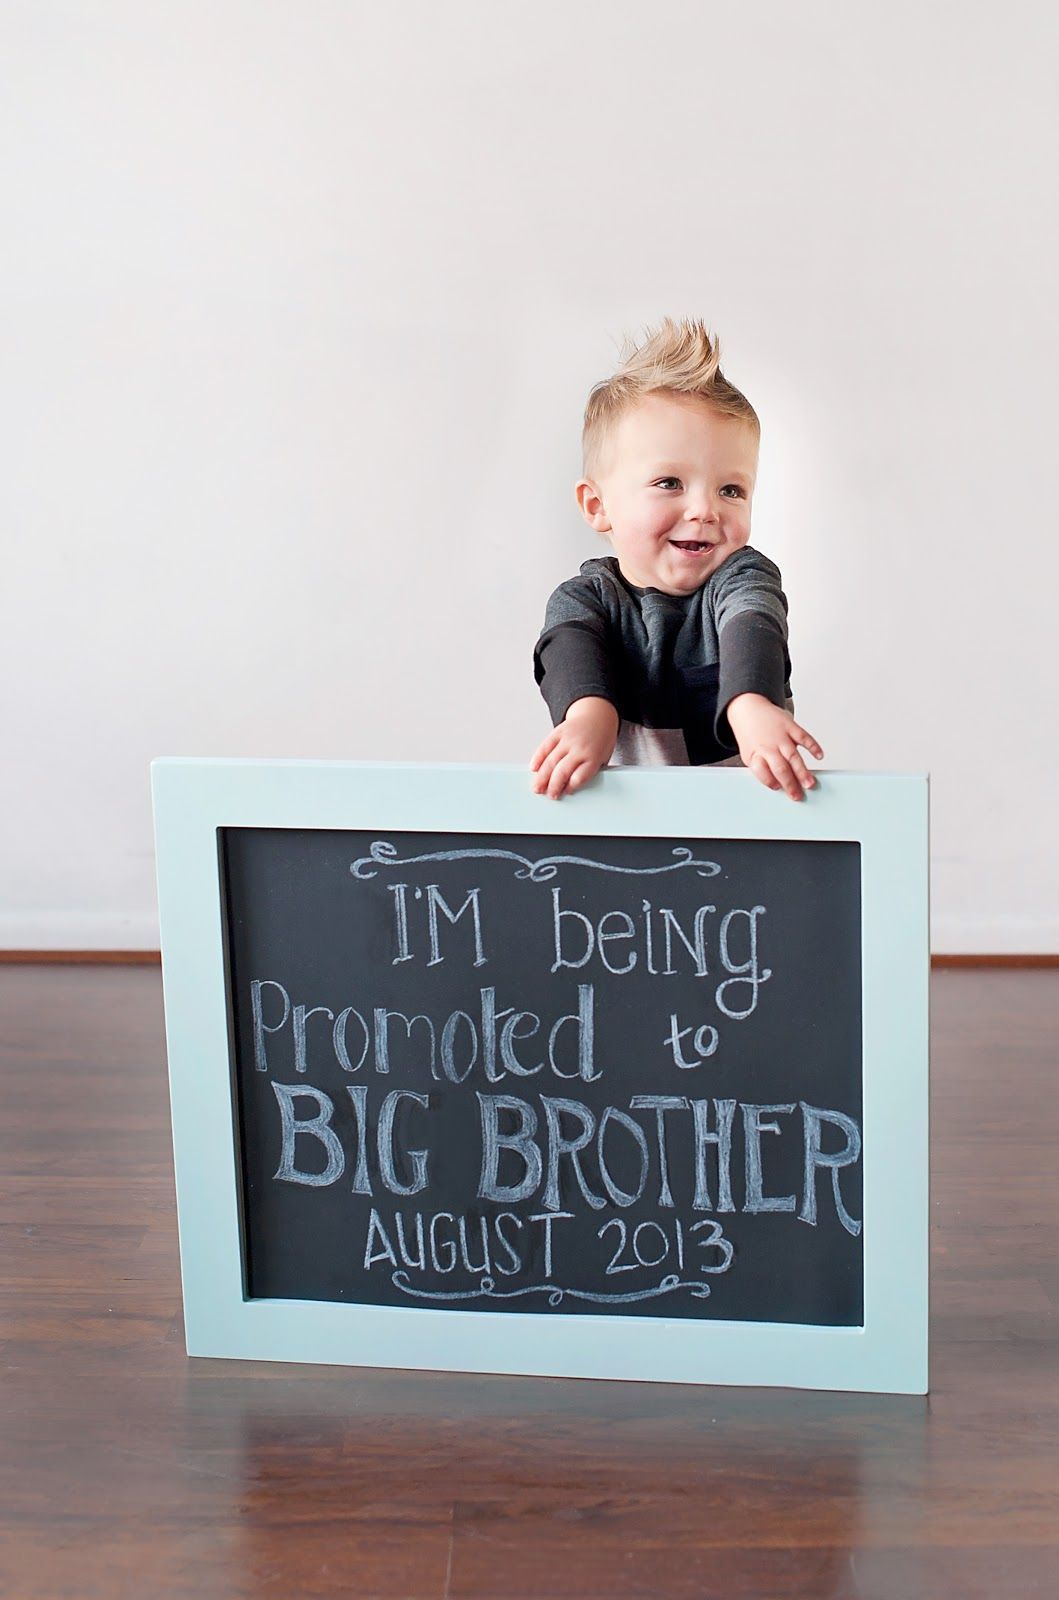 Another cute idea for a birth announcement – how to include siblings.